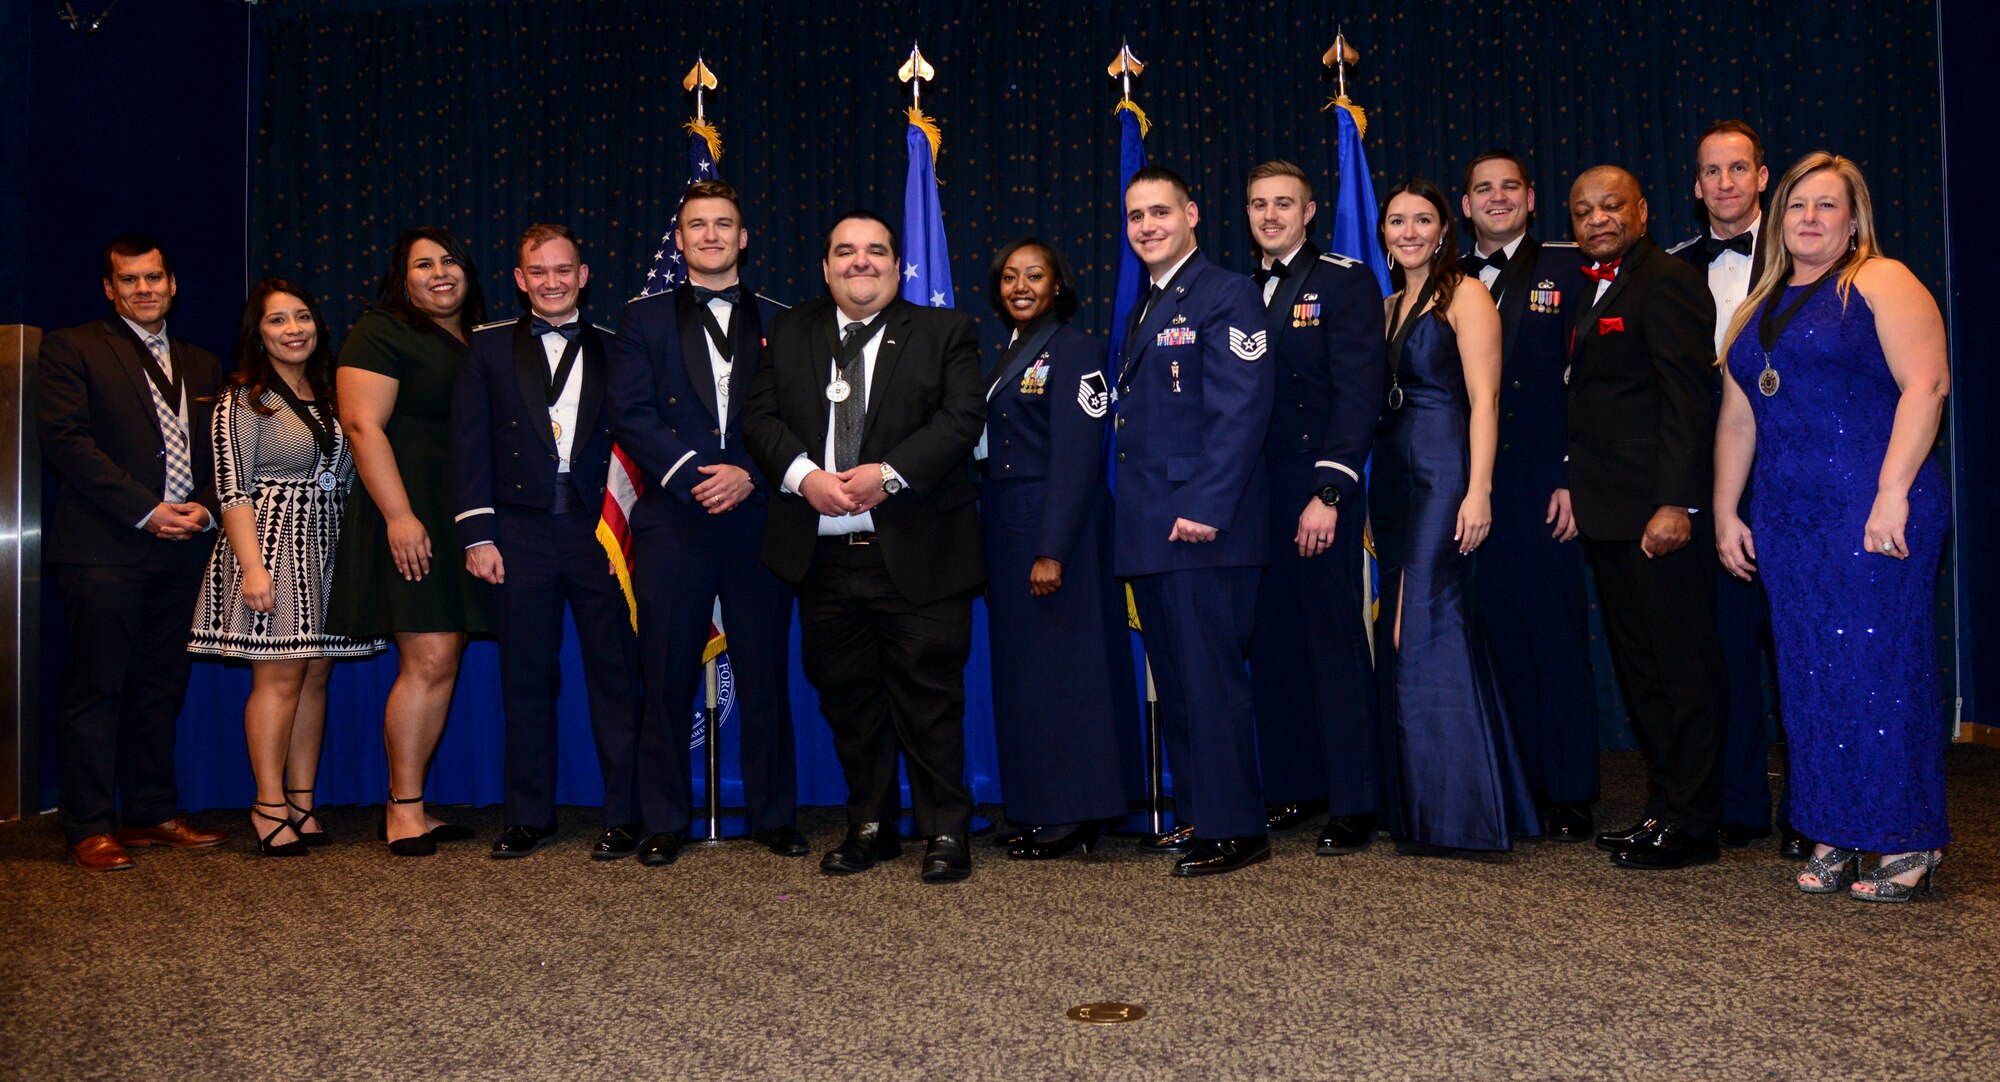 The Air Force Nuclear Weapons Center commander, Maj. Gen. Shaun Morris, congratulates the center’s annual award winners at a ceremony on Jan. 23, 2020, at the Mountain View Club, Kirtland AFB, New Mexico.  Pictured left to right: William Ramos; Paola Banuelos; Gabriella Gutierrez; 1st Lt. Andrew Miller; 2nd Lt. MacKenzie Lerum; Jonathan Holguin; Master Sgt. Latoya Saxton; Technical Sgt. Robert Jovin; Capt. Blake Branton; Katherine Schneider; Maj. Christopher Ifft; Clarence Perry; Morris; and Michelle Rivera. See story for complete list of winners. (Air Force photo by Senior Airman Alexandria Crawford)